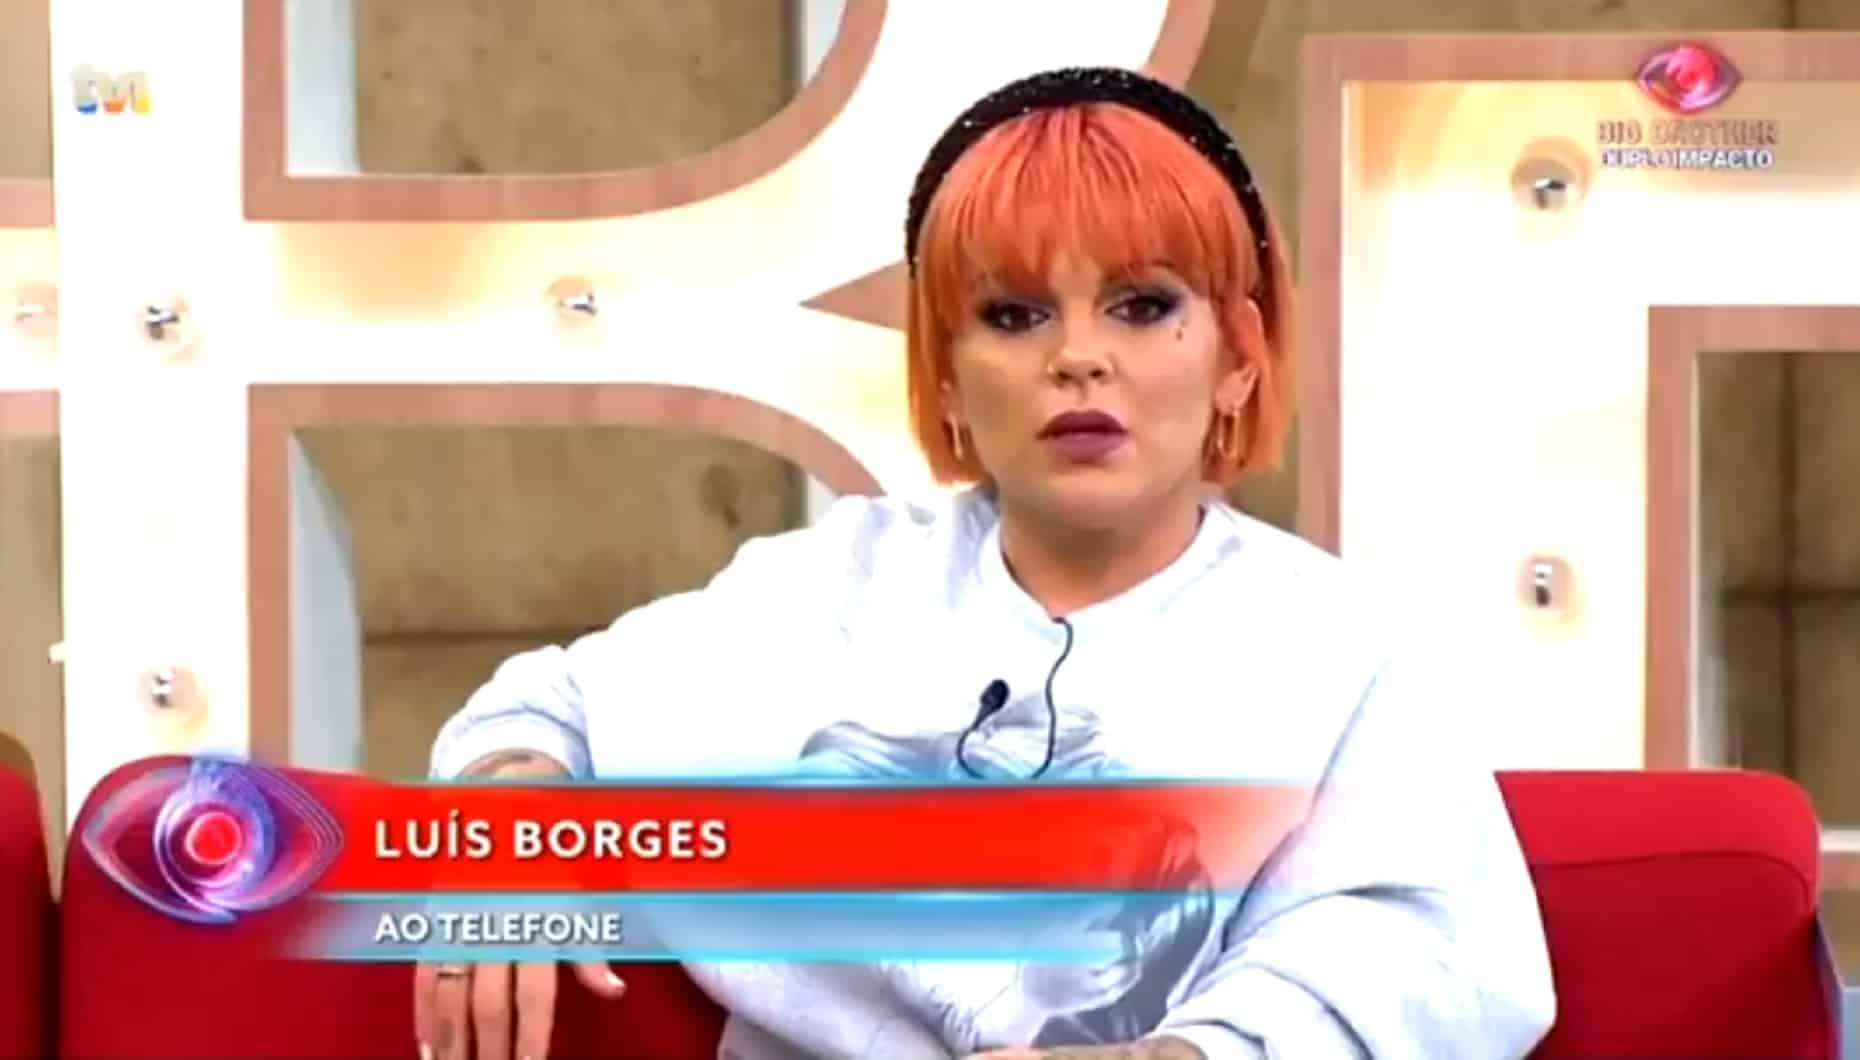 Luís Borges, Fanny, Big Brother, Extra